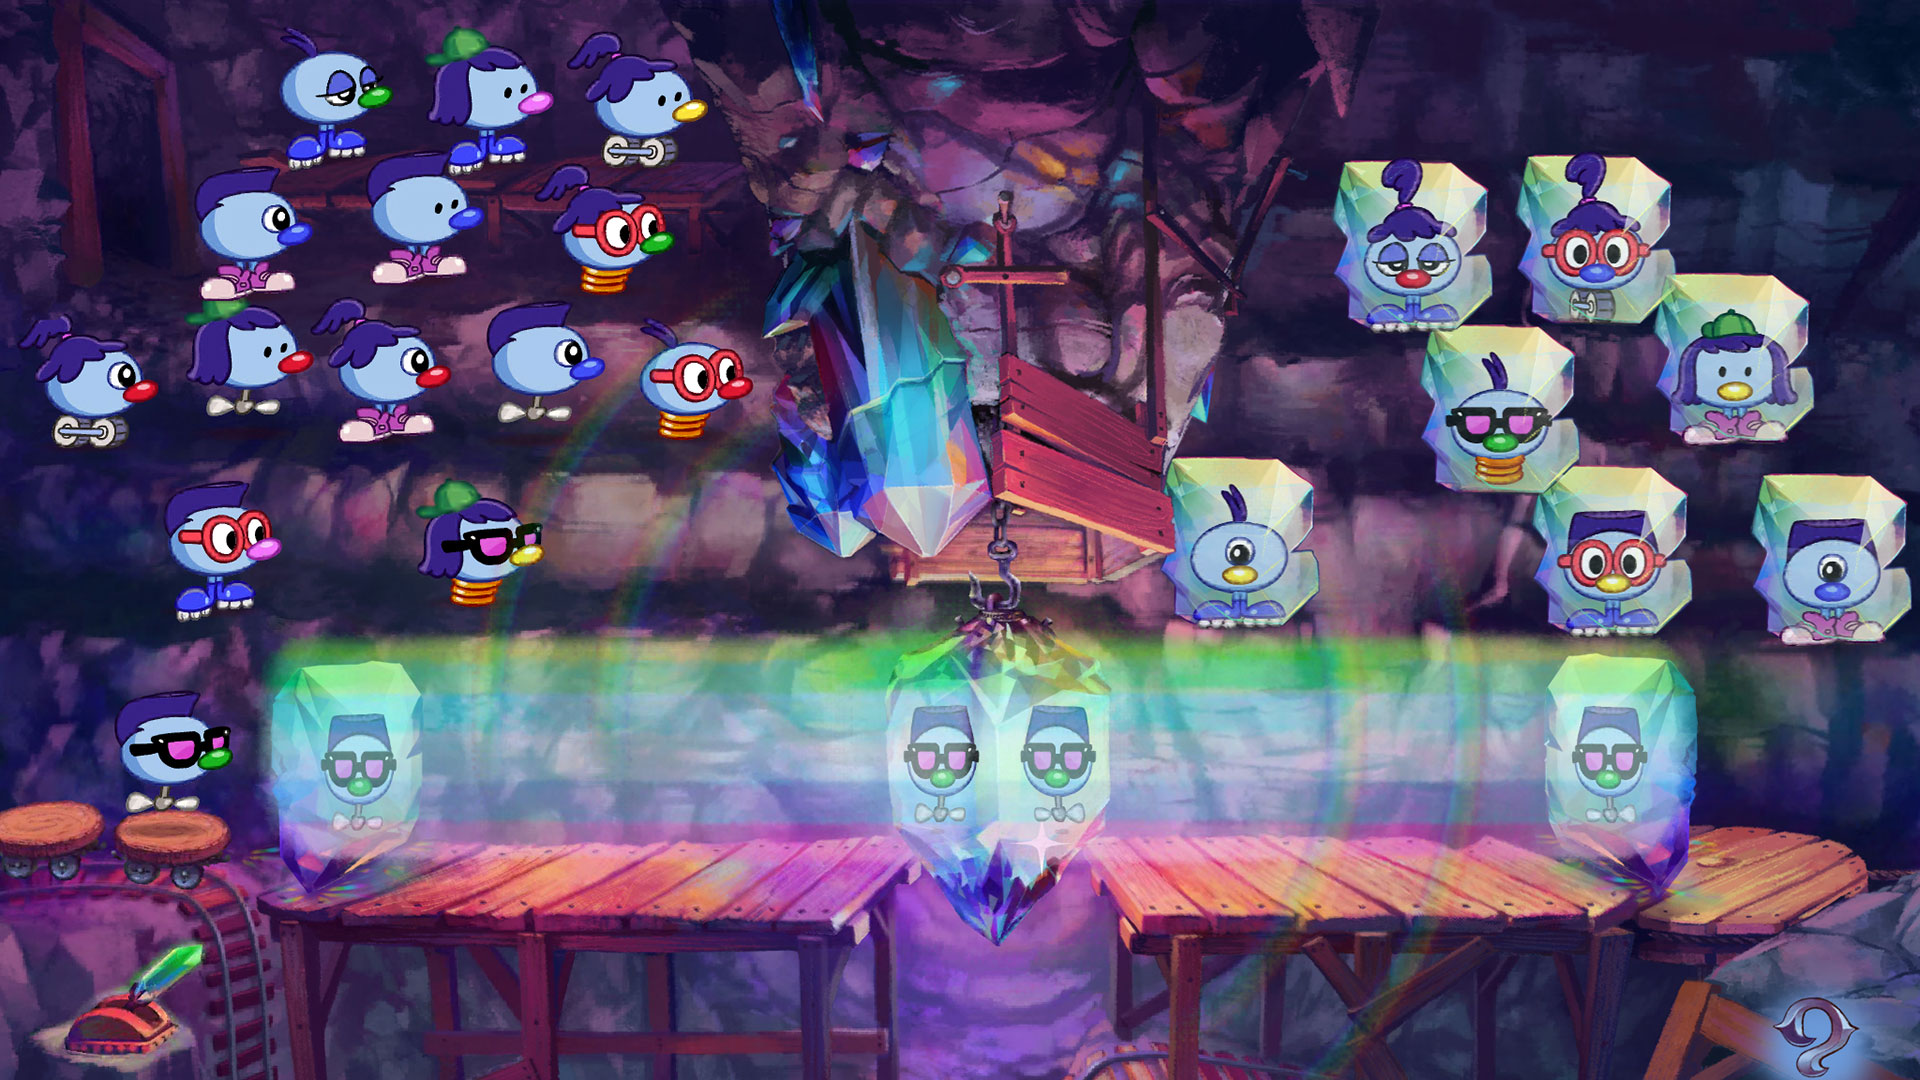 zoombinis mountain rescue mac download